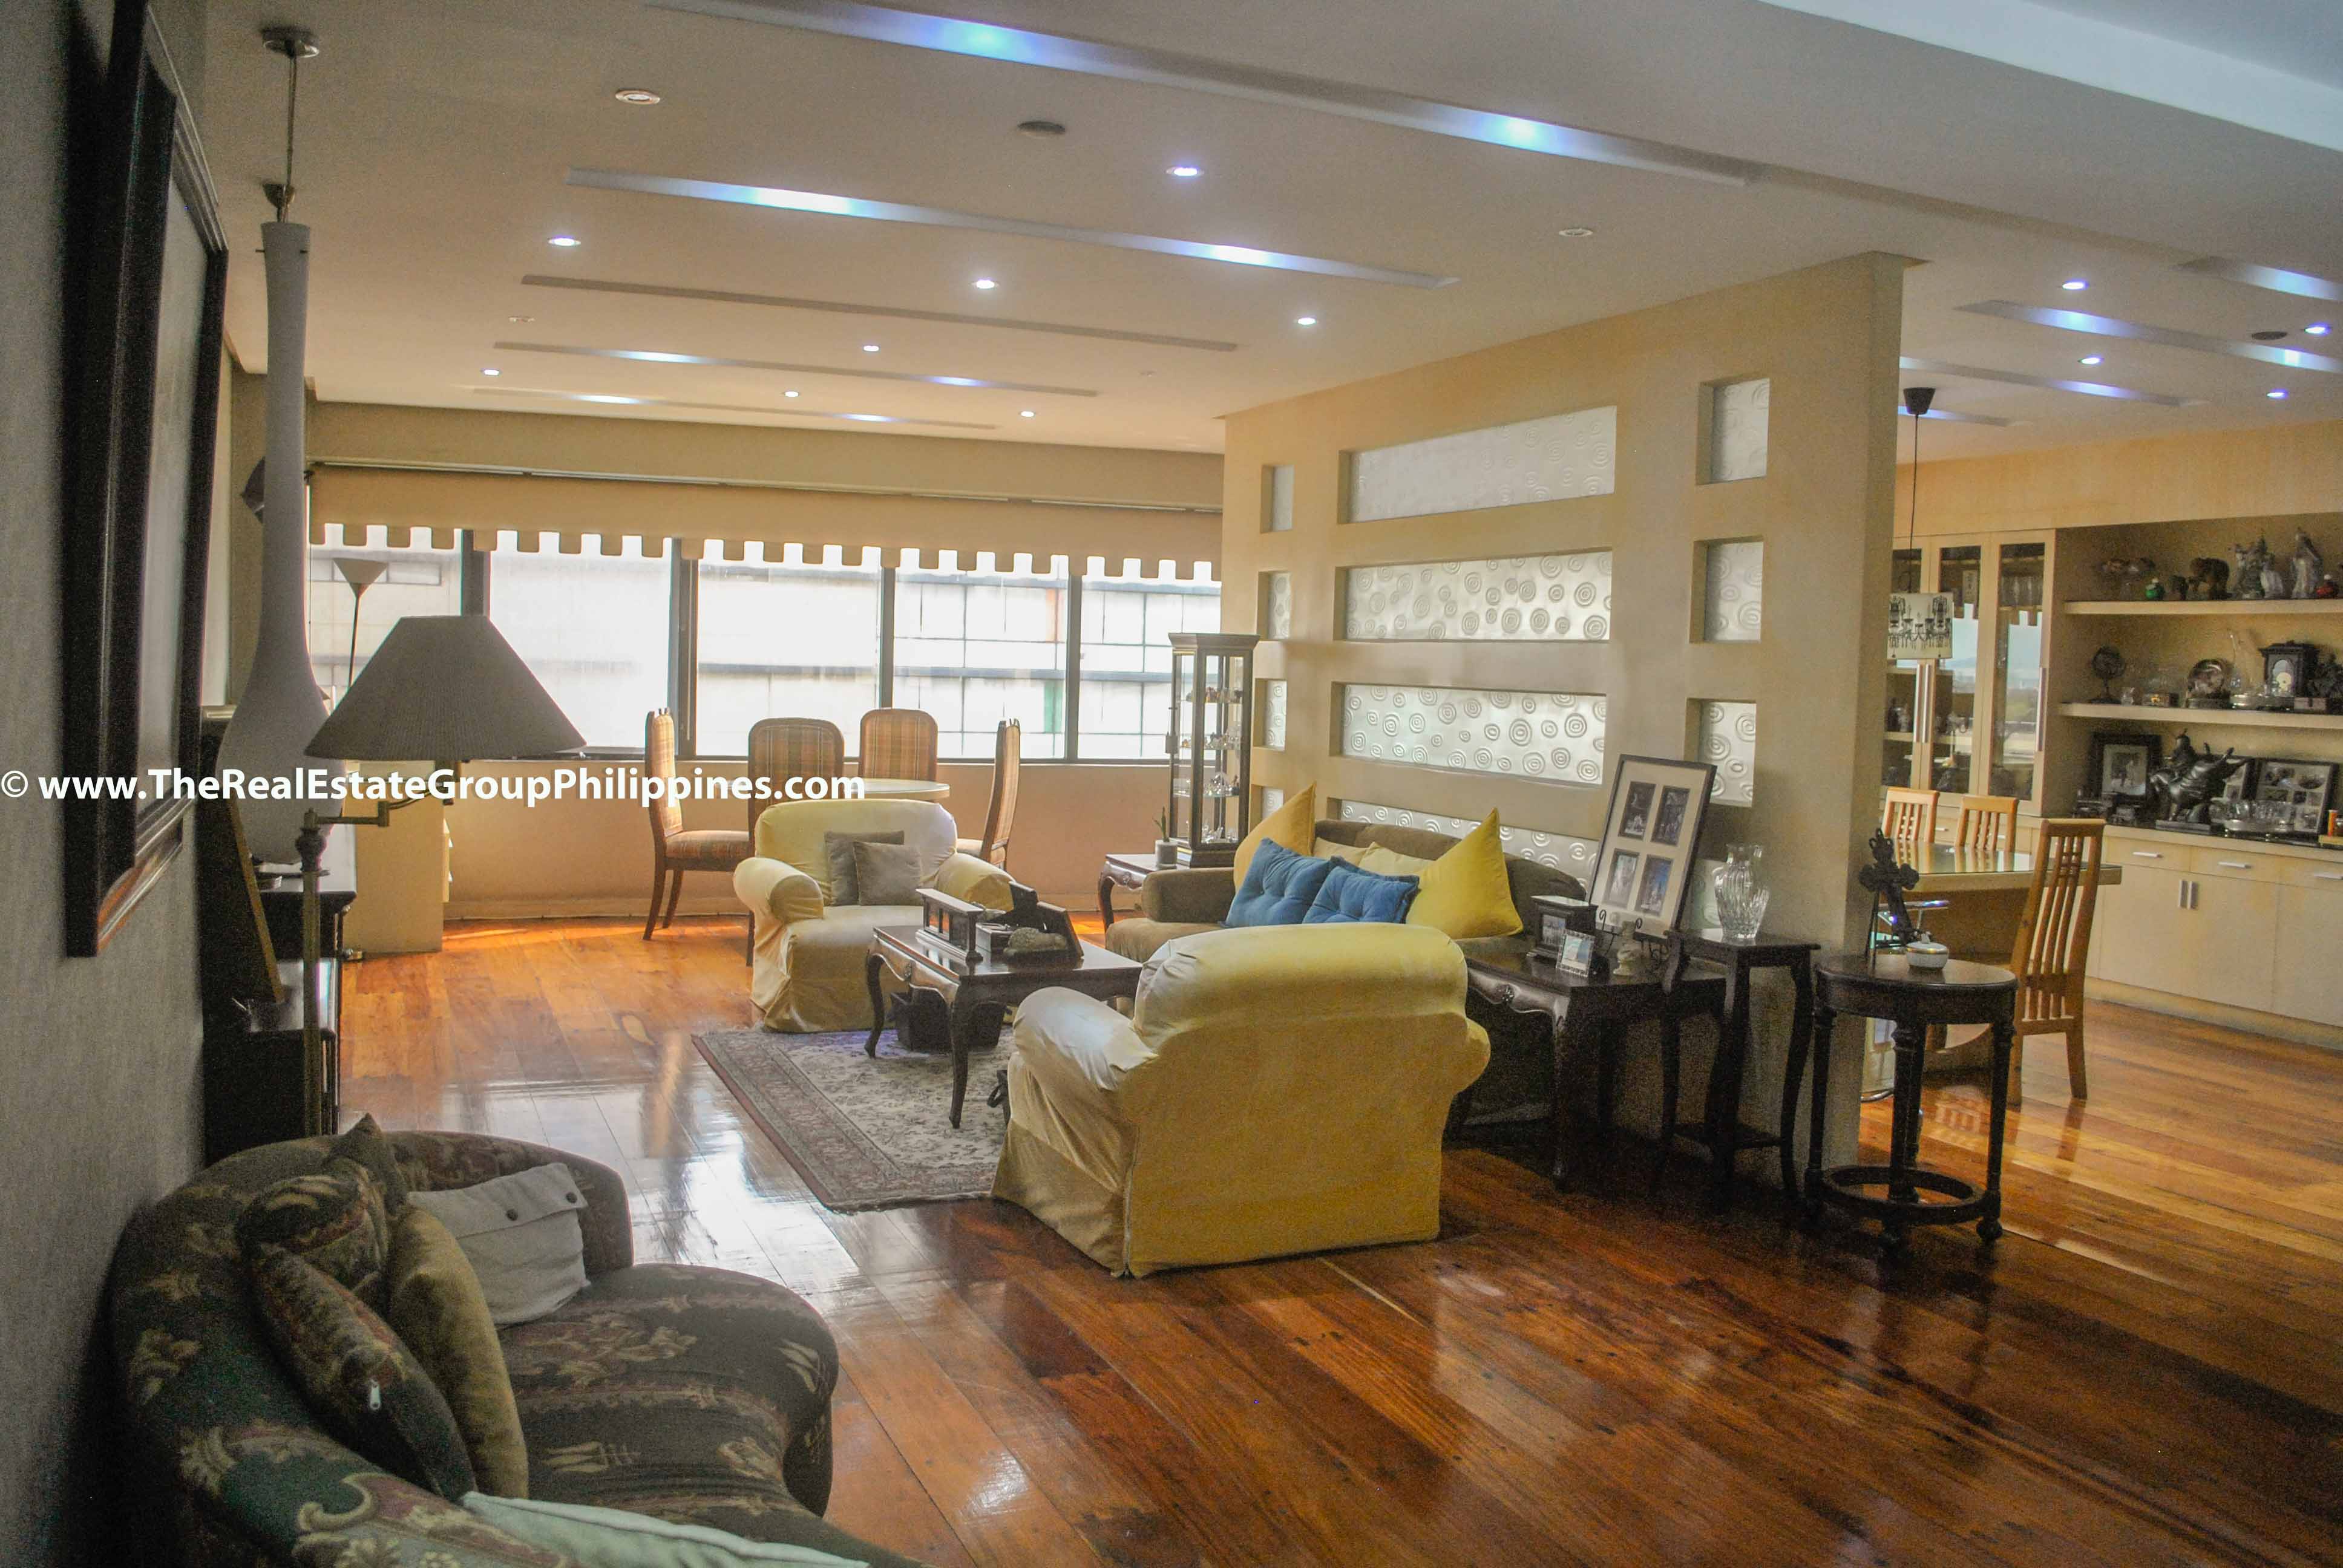 3BR For Sale Pacific Plaza Ayala 9B-1